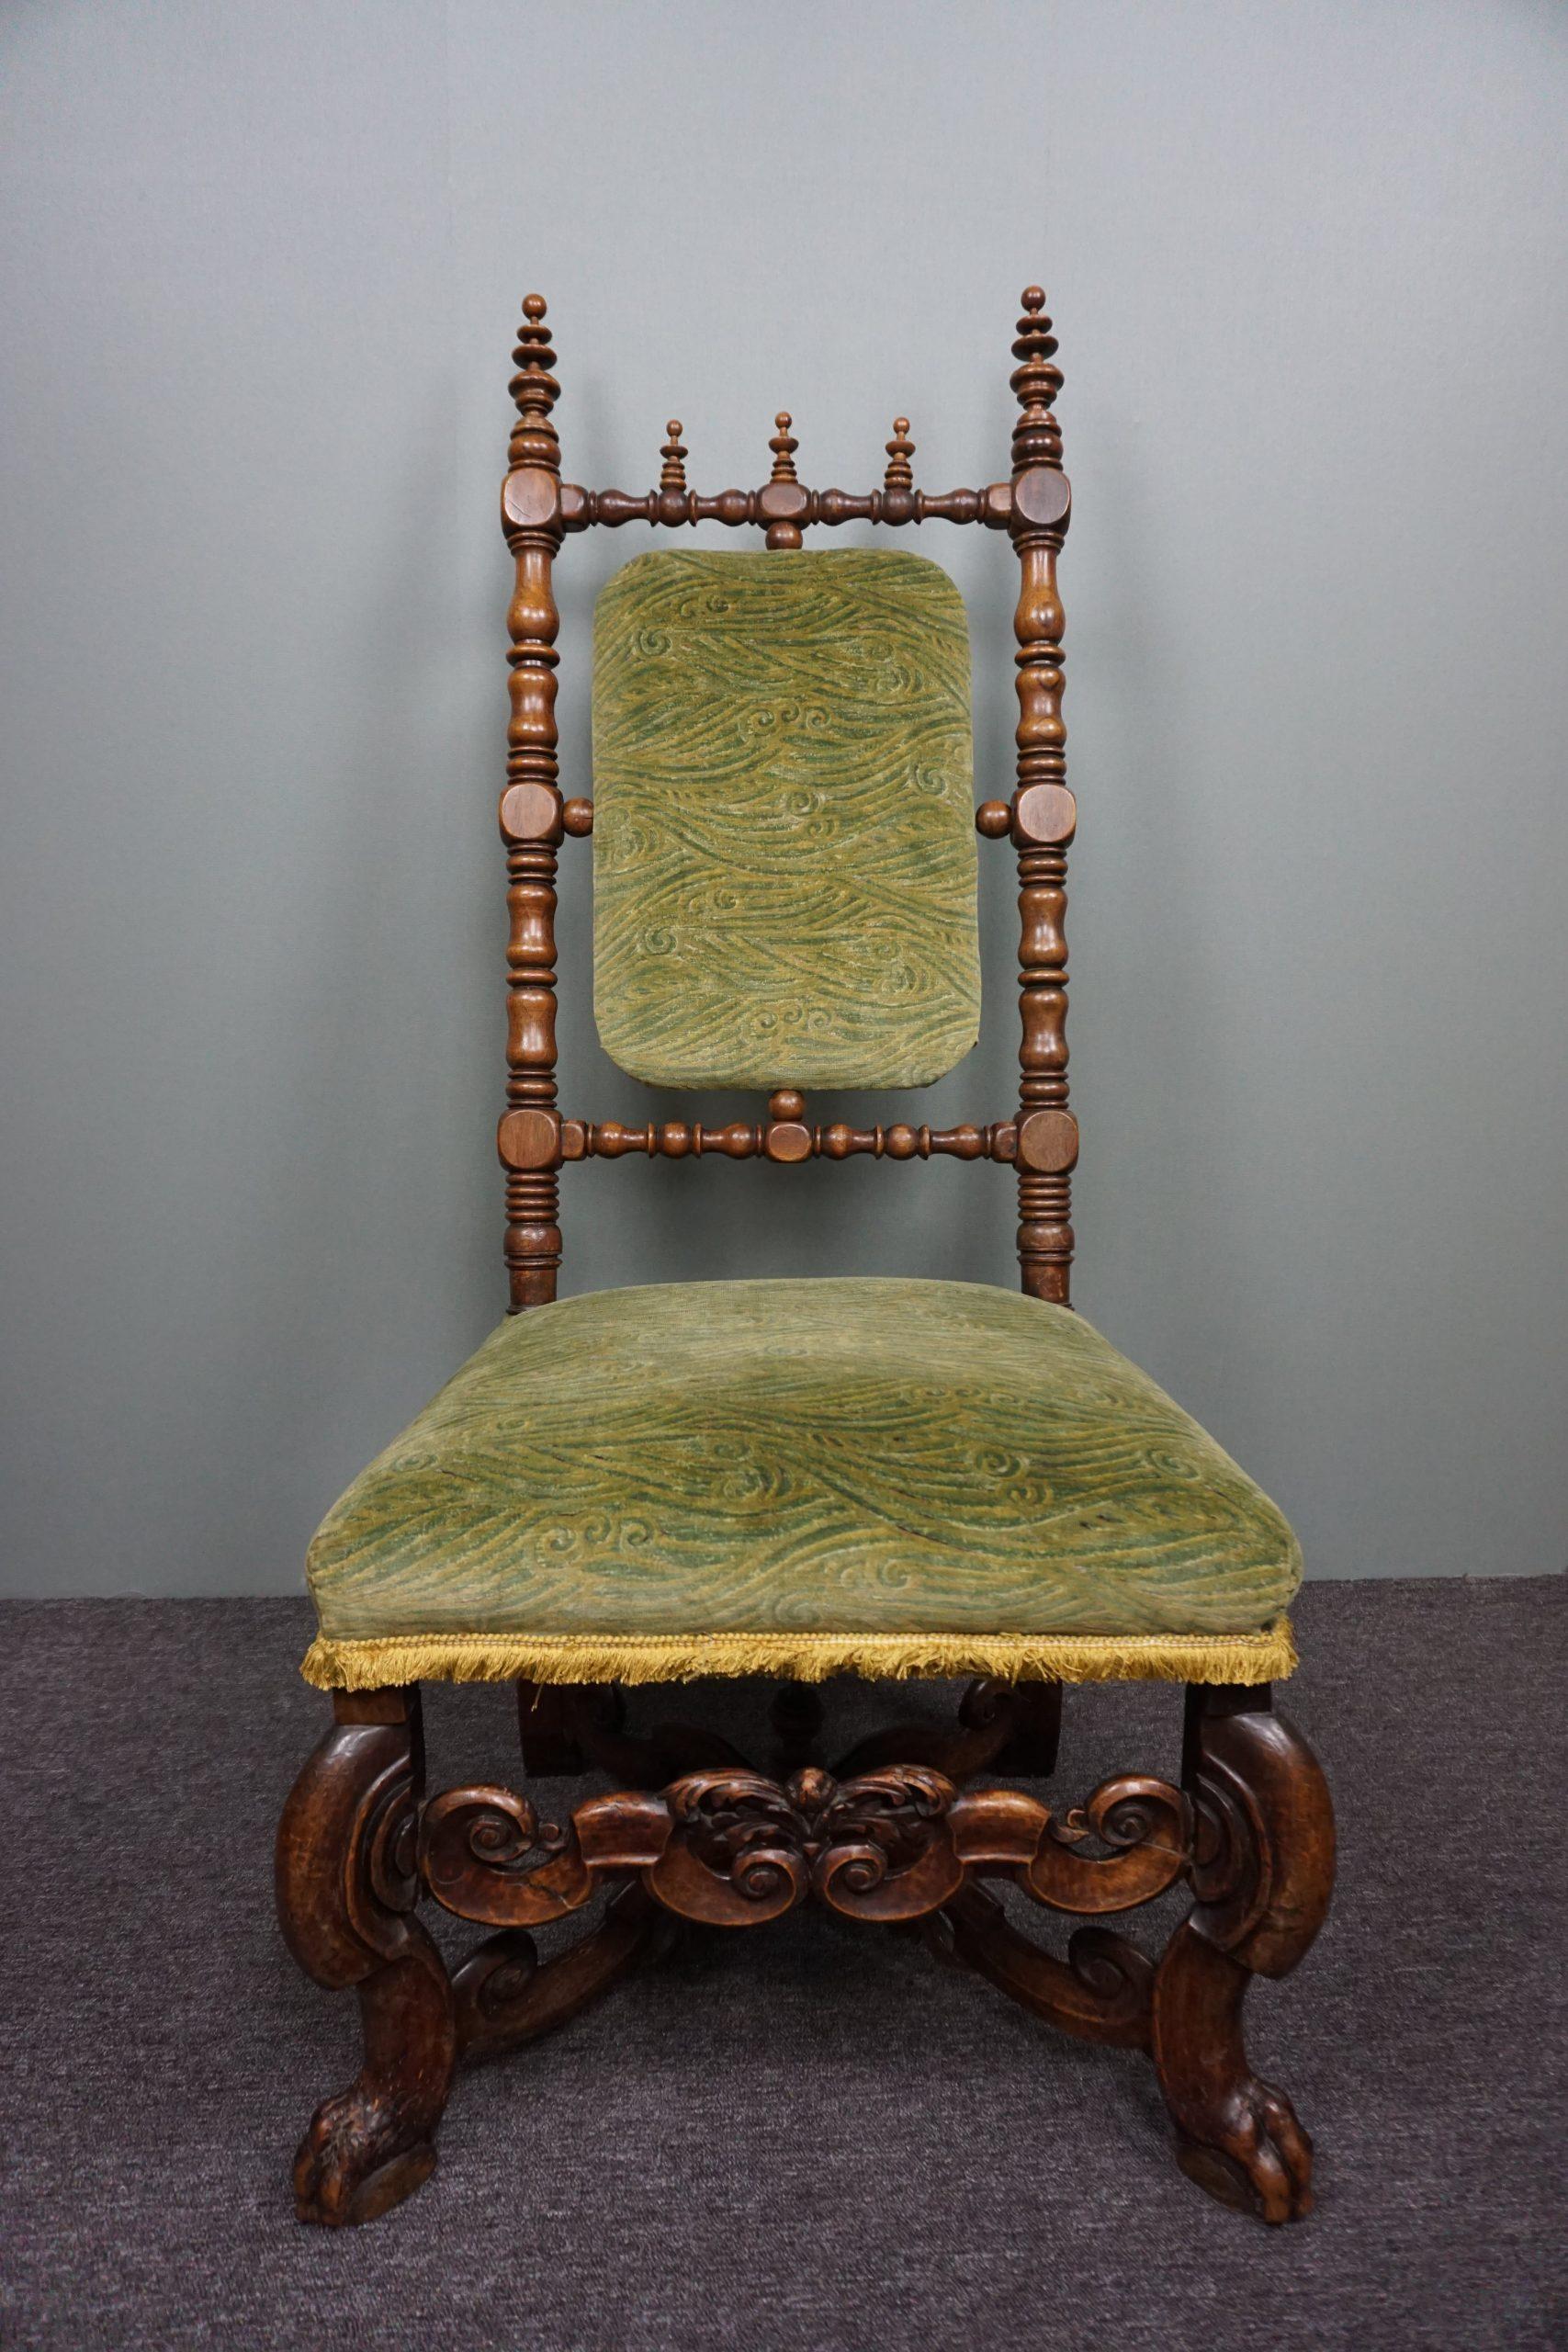 Offered is this beautiful antique pearl.

What a particularly beautiful piece to see. We love this! The chair is of good age and is in correct condition. The carvings are rich and detailed. Such an item enriches every room.

NB:
The dimensions